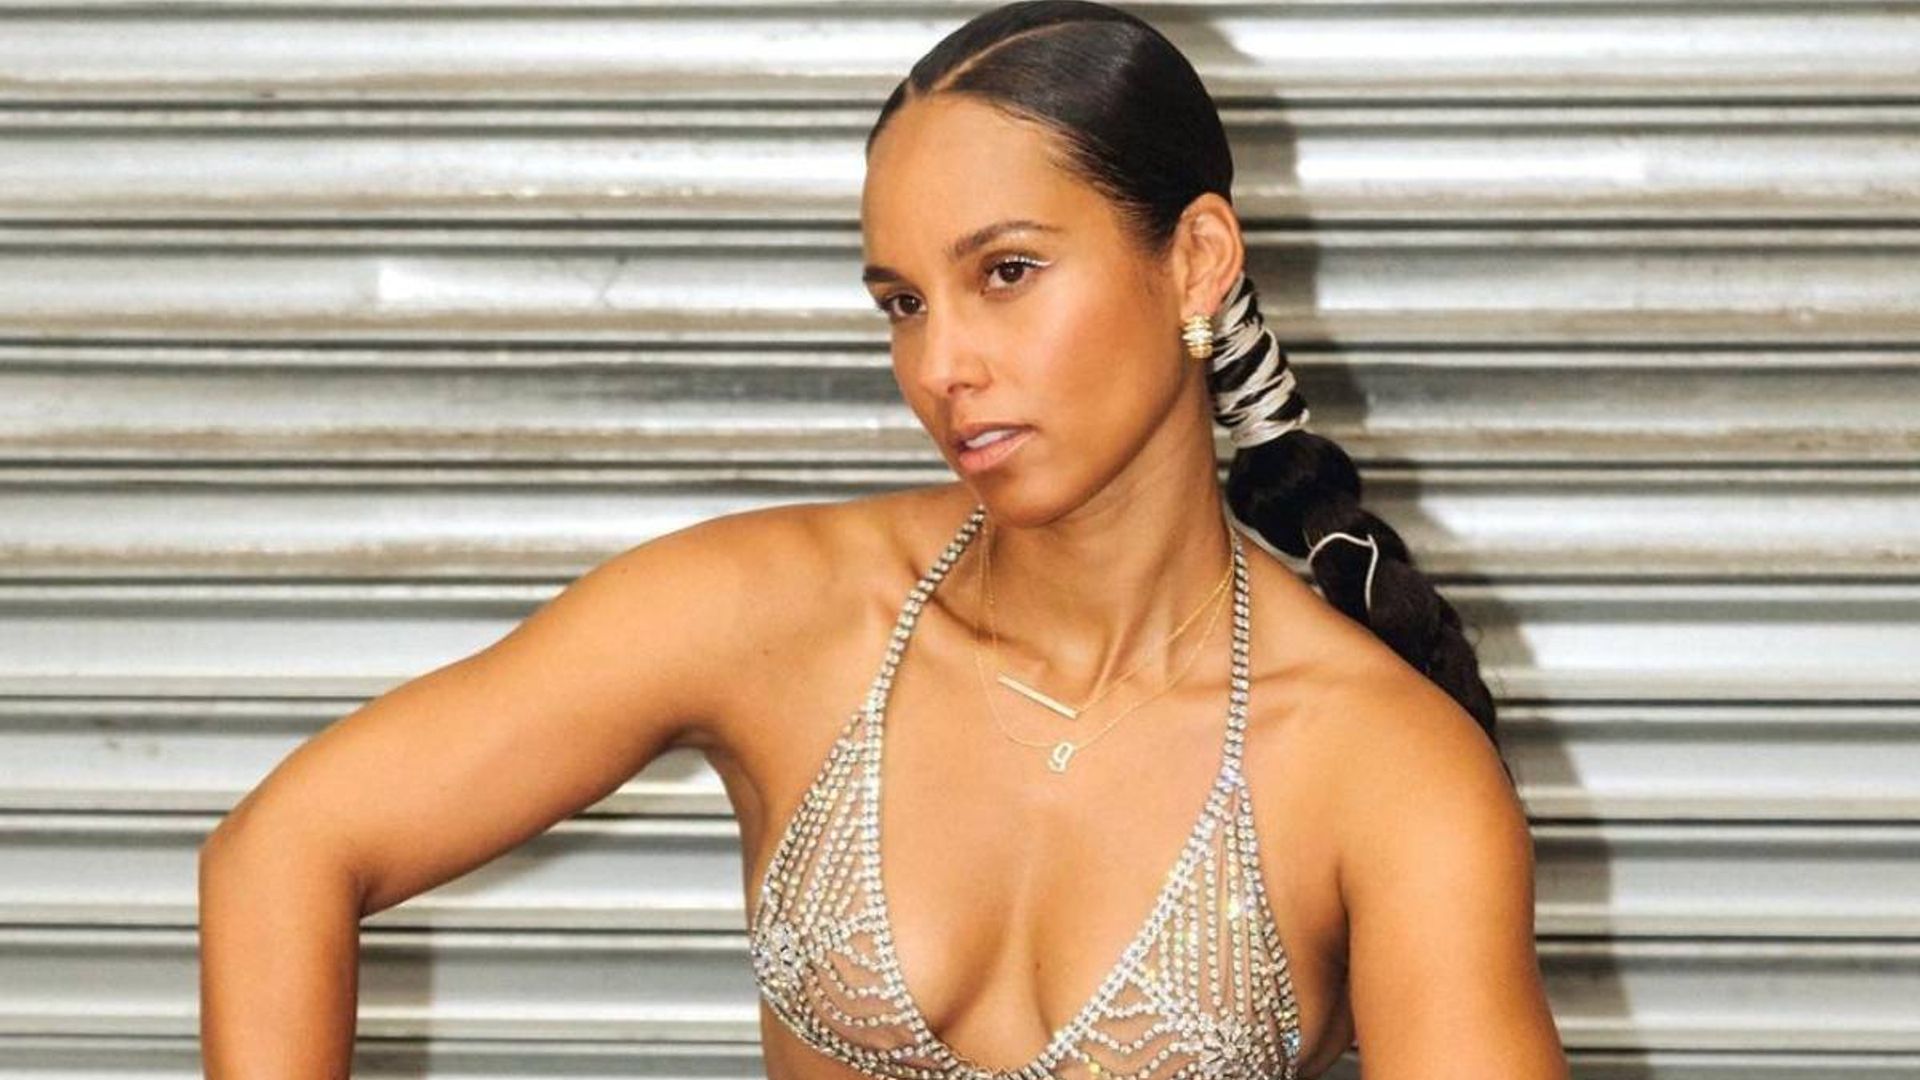 Alicia Keys almost broke the internet in this sizzling pre-Super Bowl sparkly look